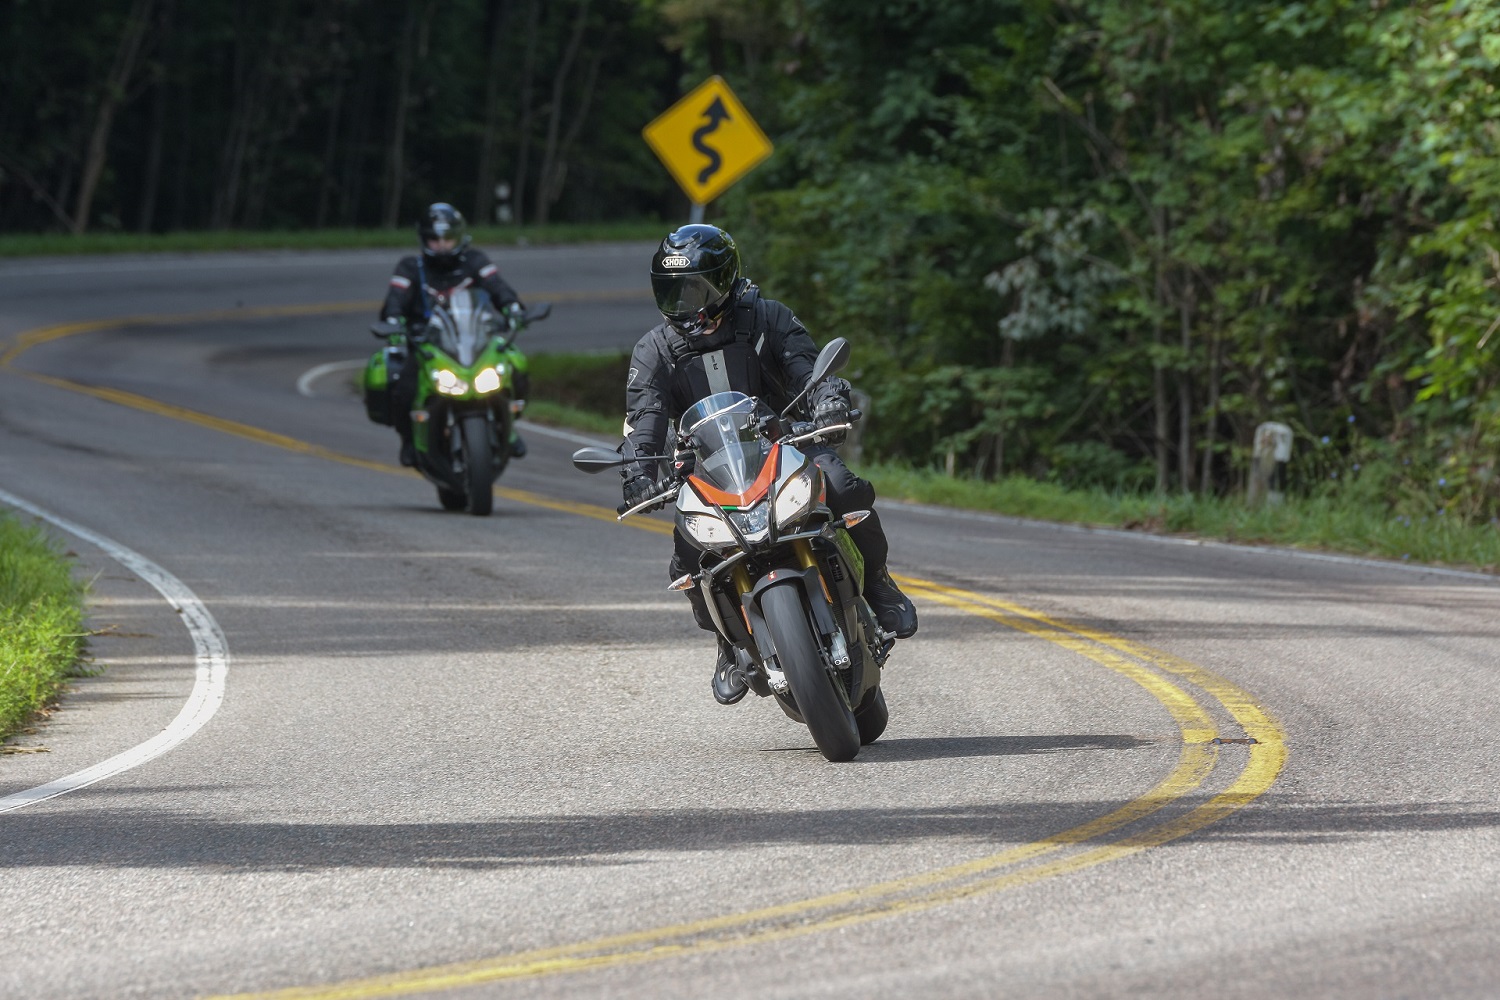 The Snake 2018 tennessee motorcycle ride.jpg 